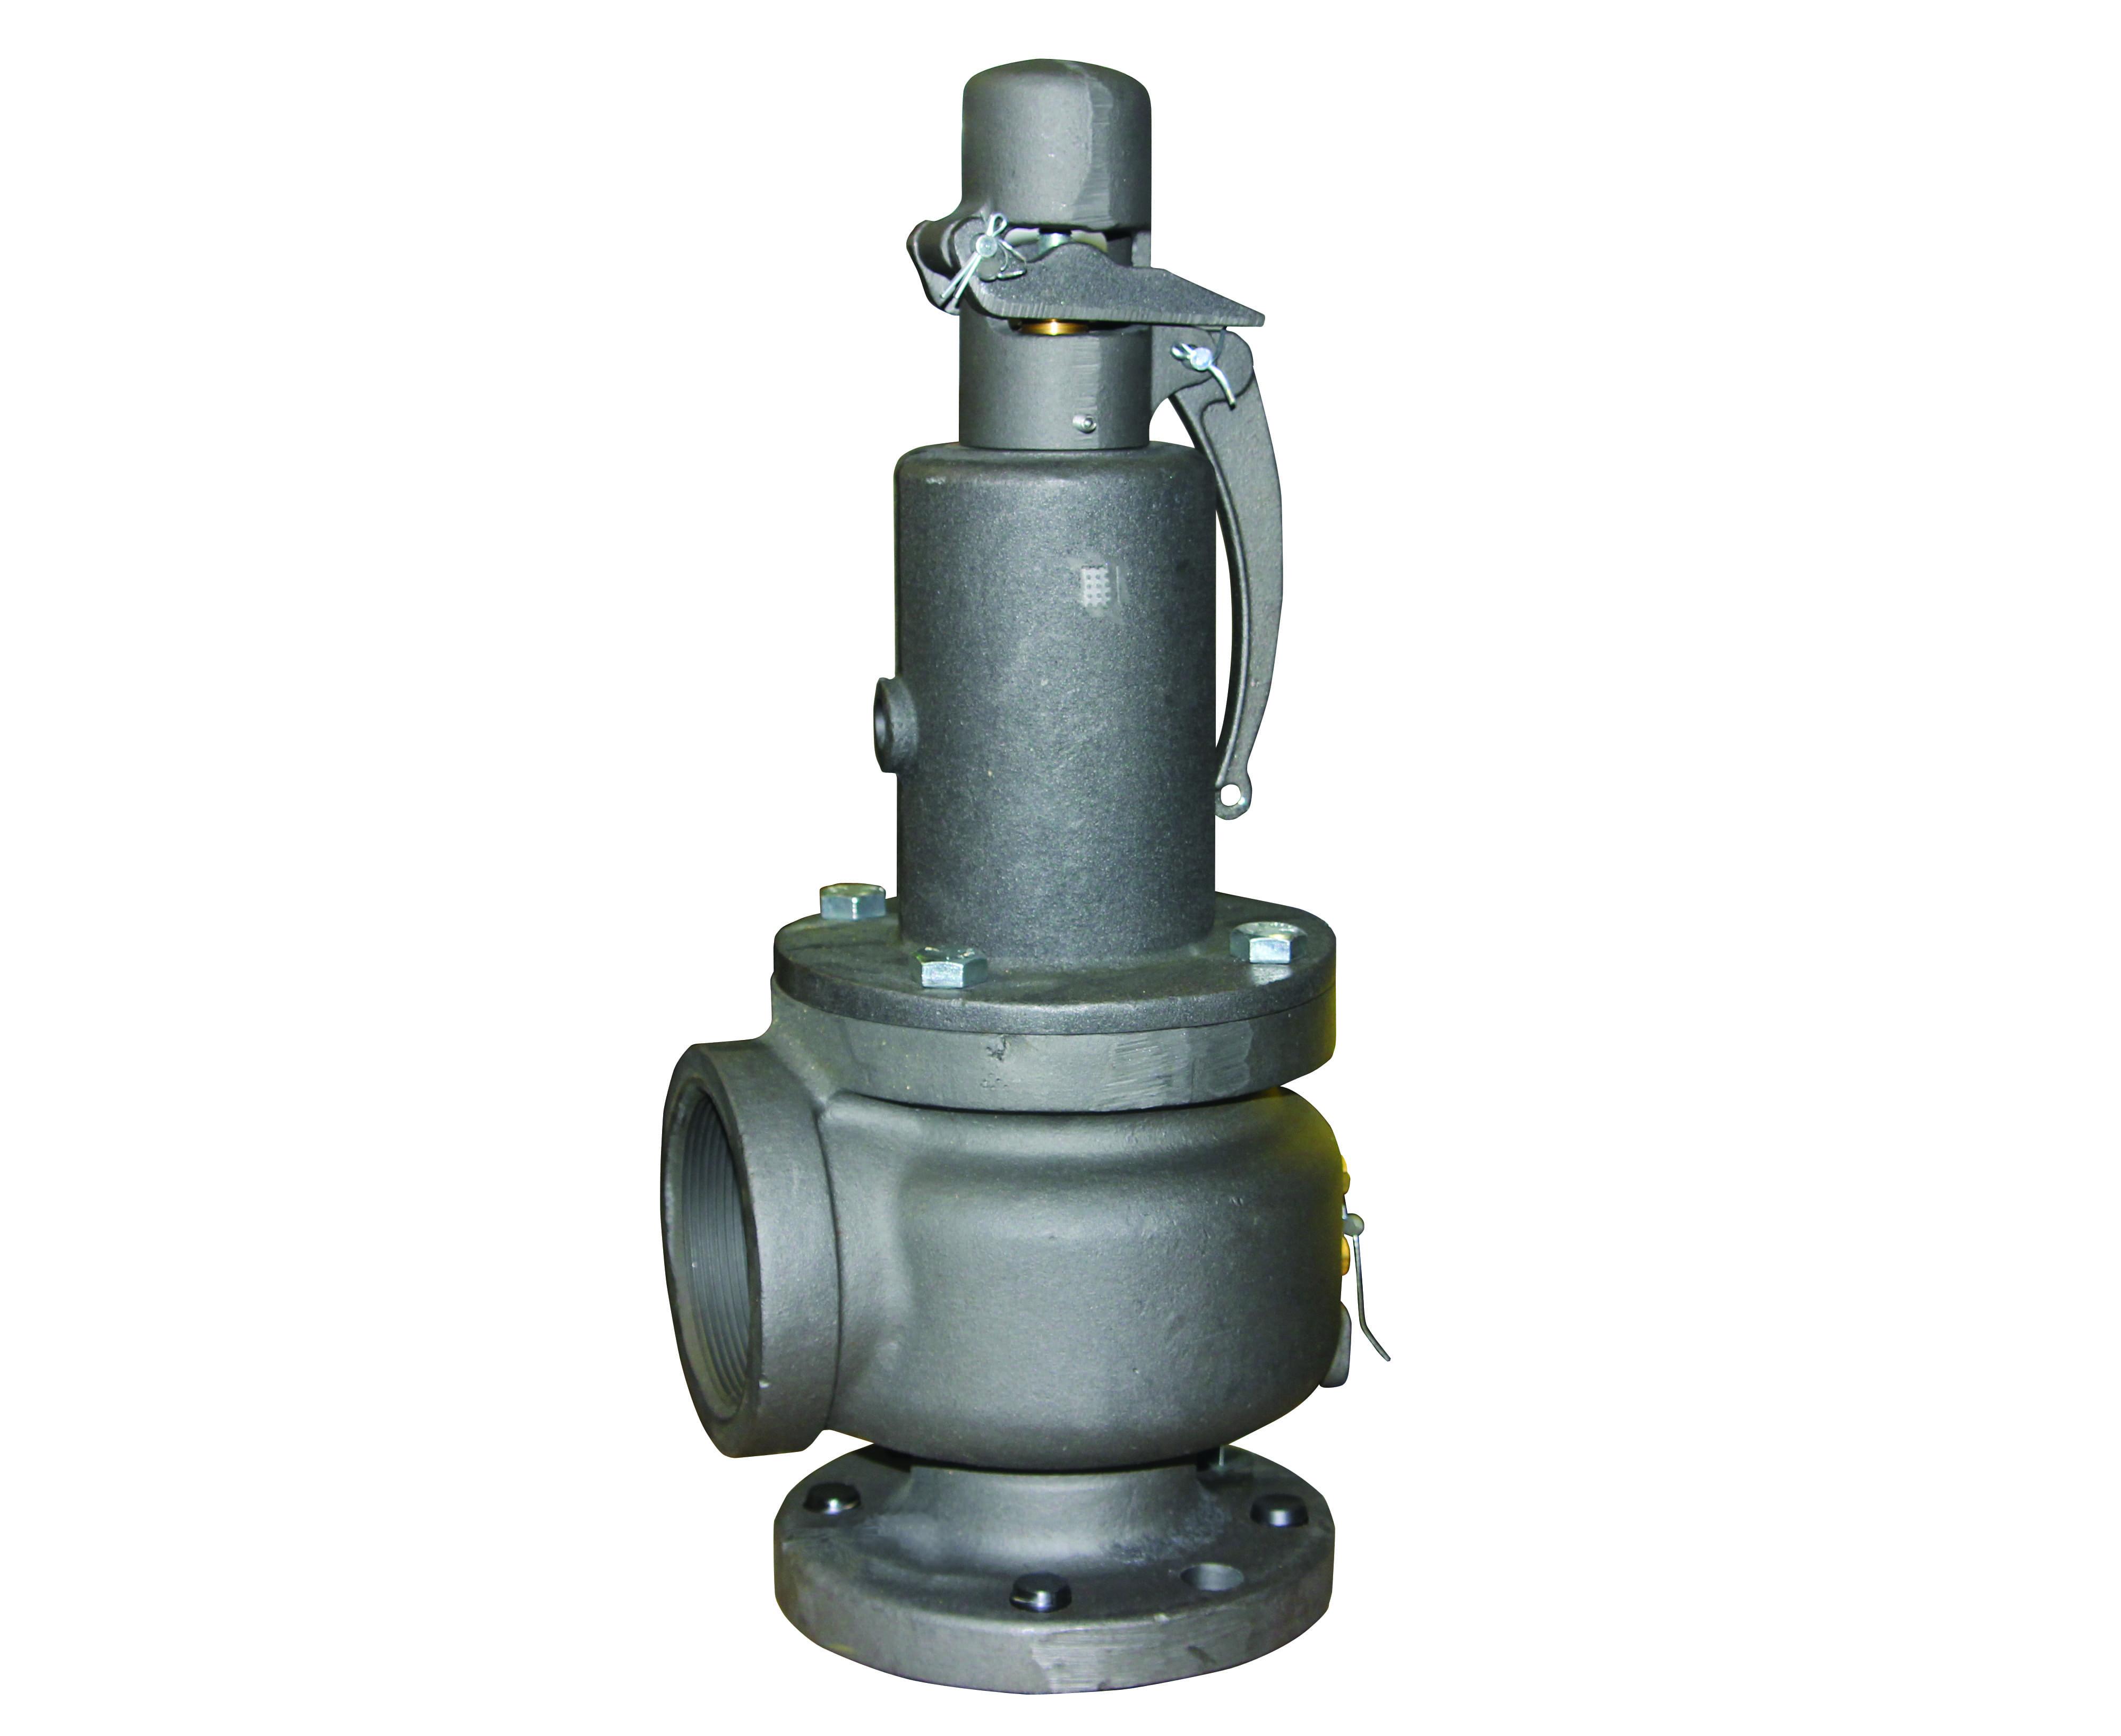 Preview image for Apollo ASME Section VIII Air Cast Iron Safety Relief Valve, 2" x 3" (2 x FNPT)